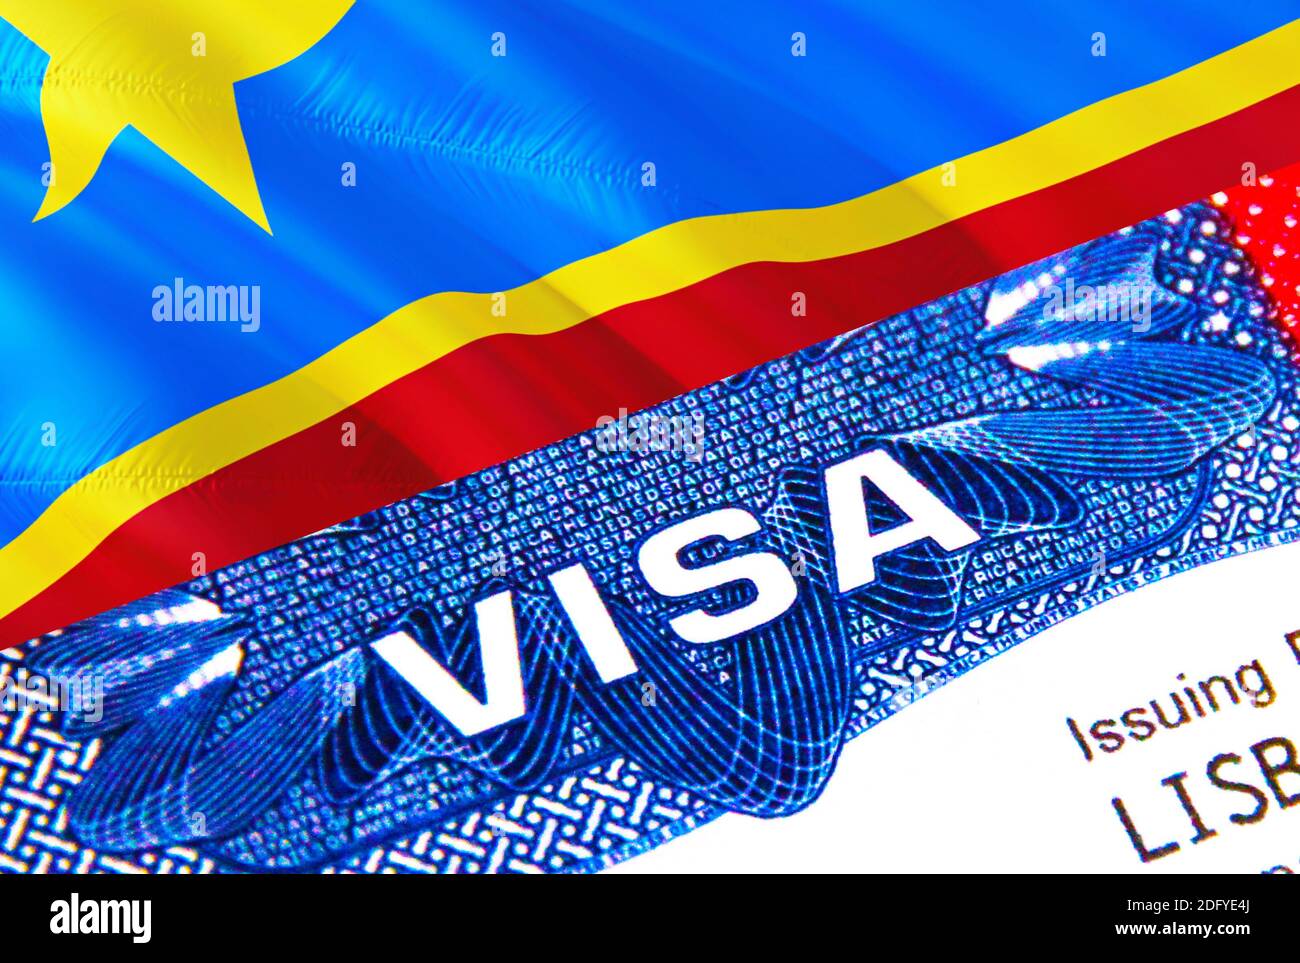 DR Congo Visa in passport. USA immigration Visa for DR Congo citizens focusing on word VISA. Travel DR Congo visa in national identification close-up, Stock Photo